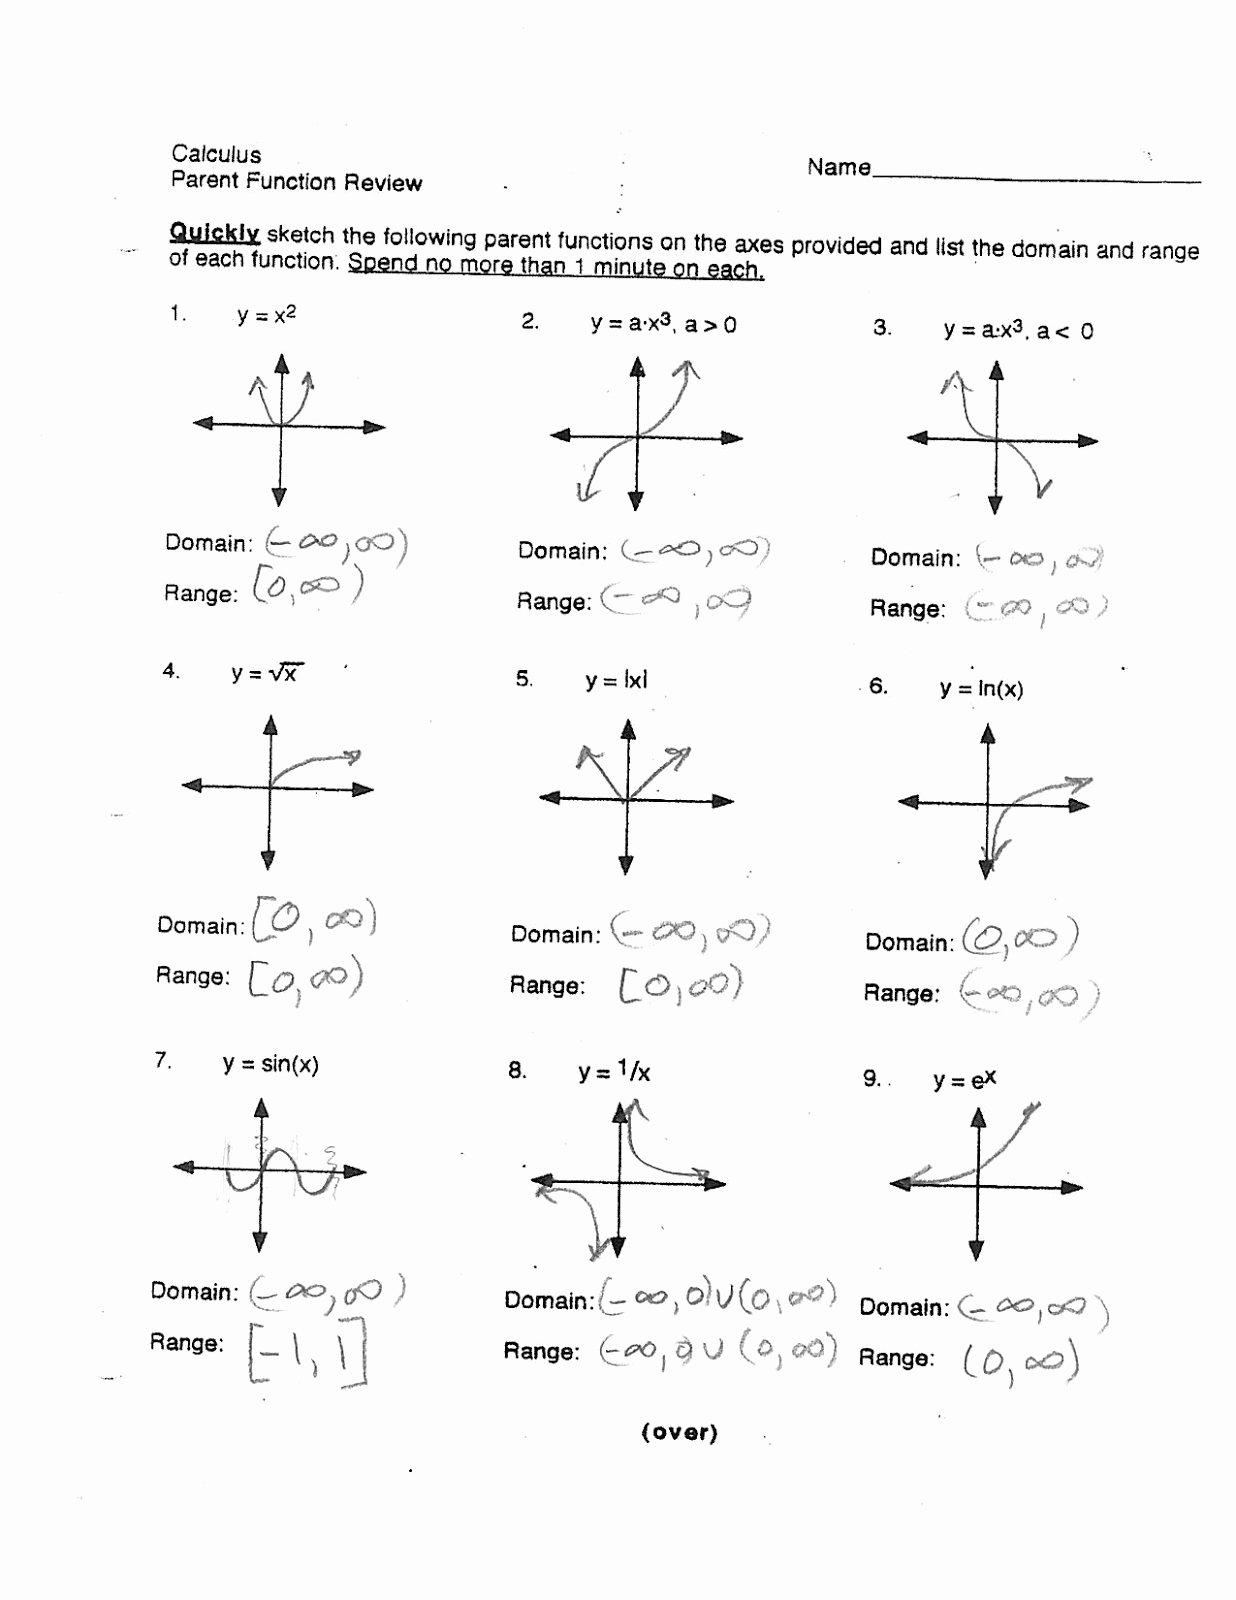 Domain and Range Worksheet Answers Lovely Mr Suominen S Math Homepage Honors Calculus 9 5 13